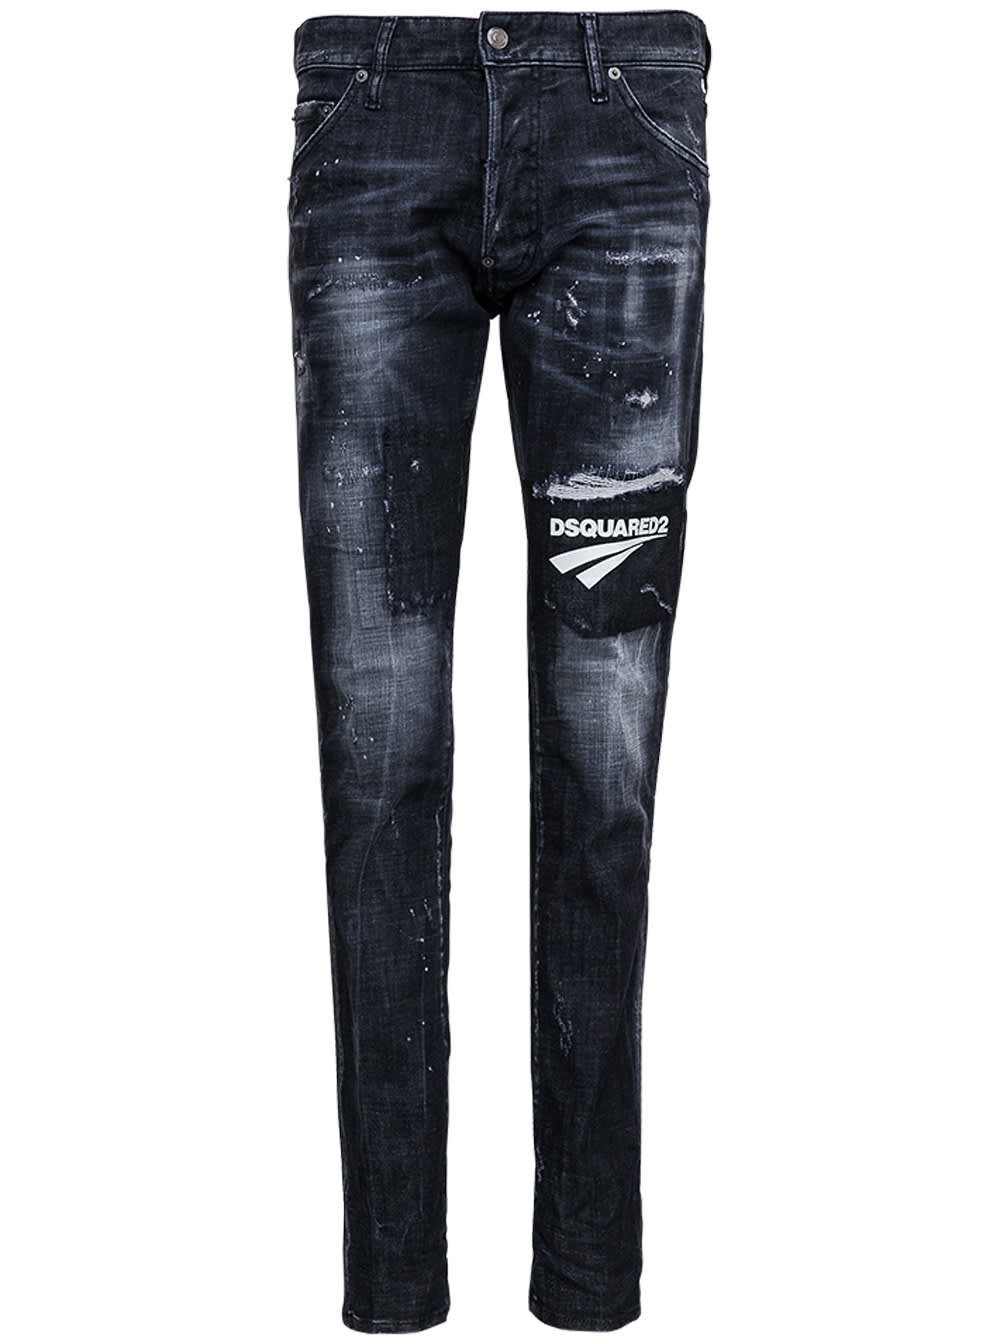 Dsquared2 Black Denim Jeans With Tears Detail And Logo